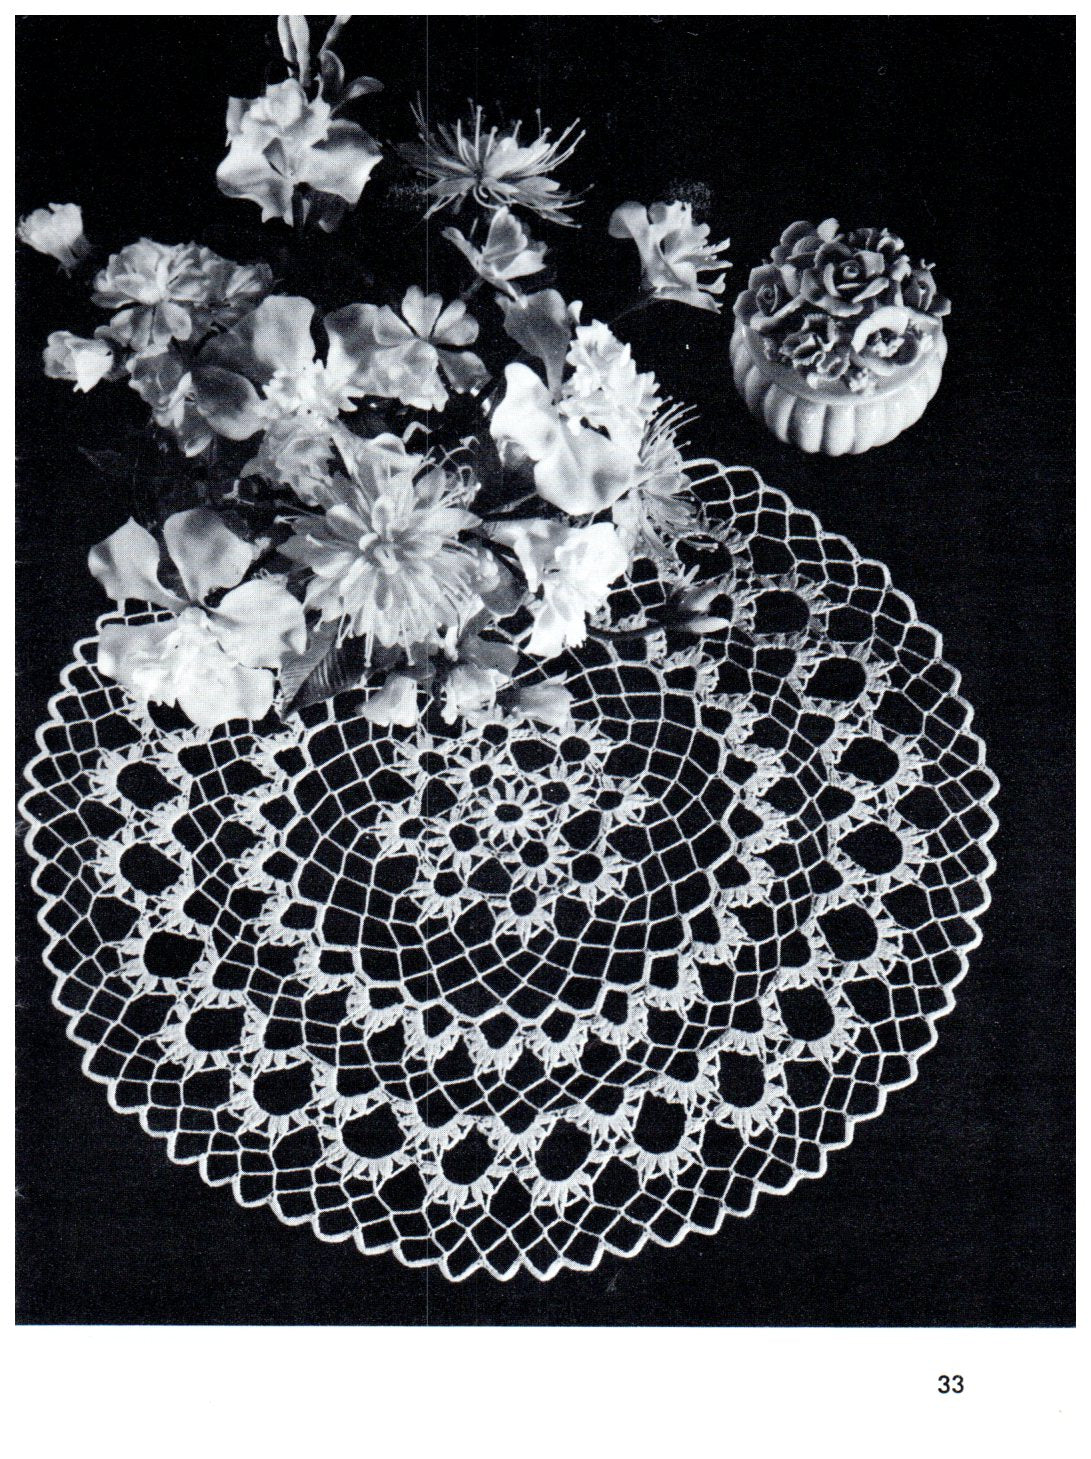 Vintage Crochet Doily Patterns 1967 Priscilla Doilies Rick Rack Knit Hairpin Lace Tatted Coats & Clark's Book No. 174  Downloadable PDF - At Grandma's Table